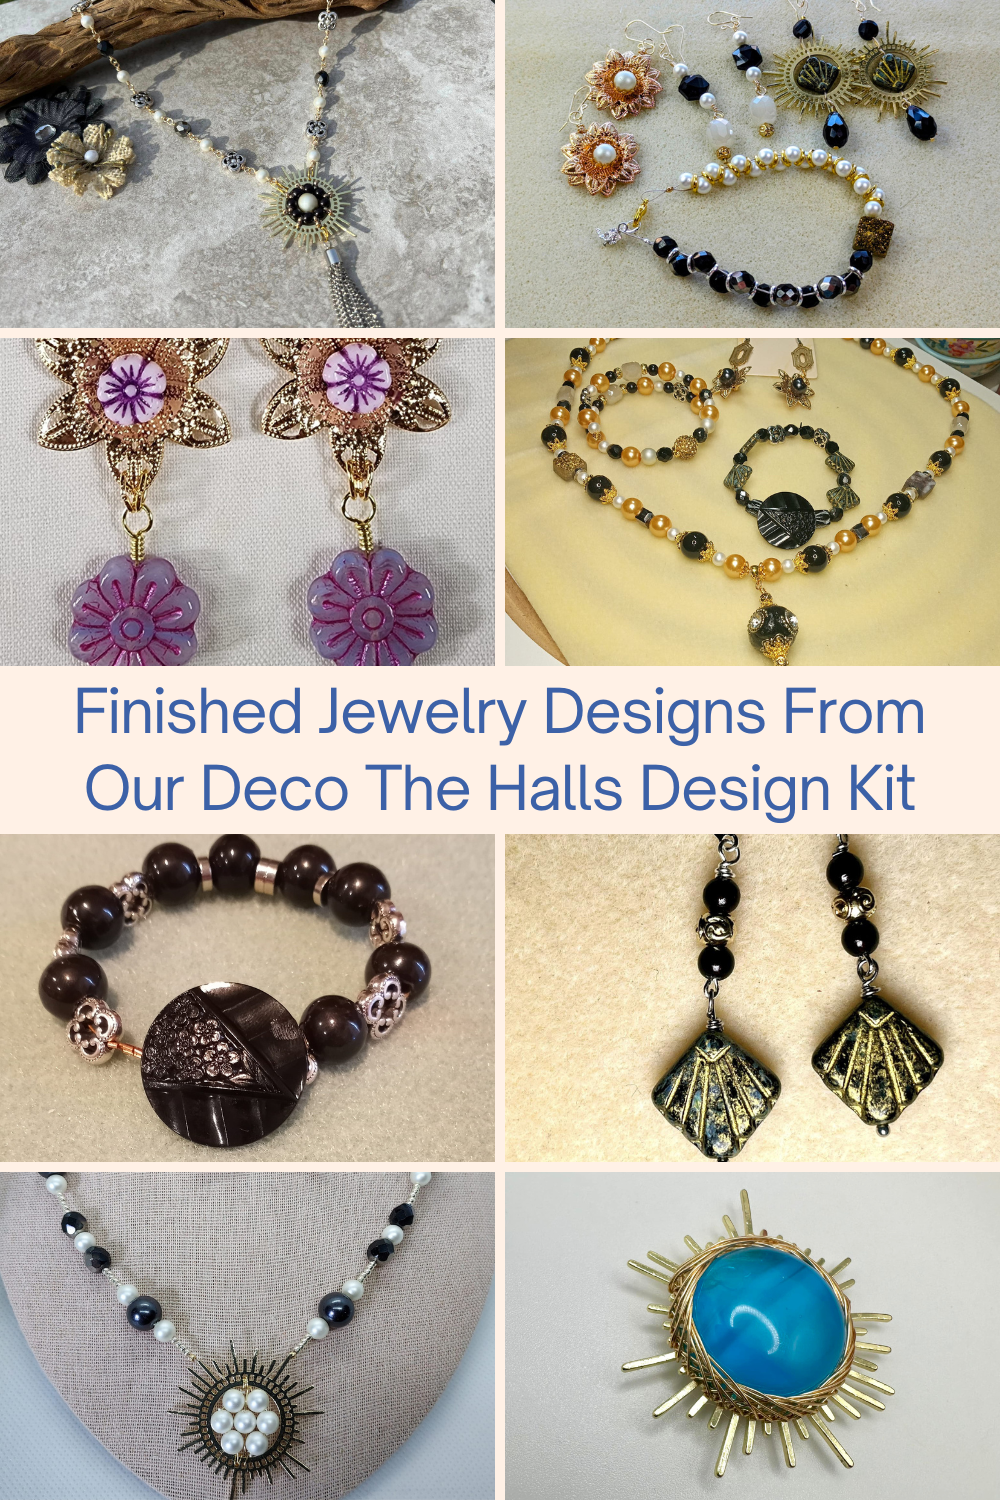 Finished Jewelry Designs From Our Deco The Halls Design Kit